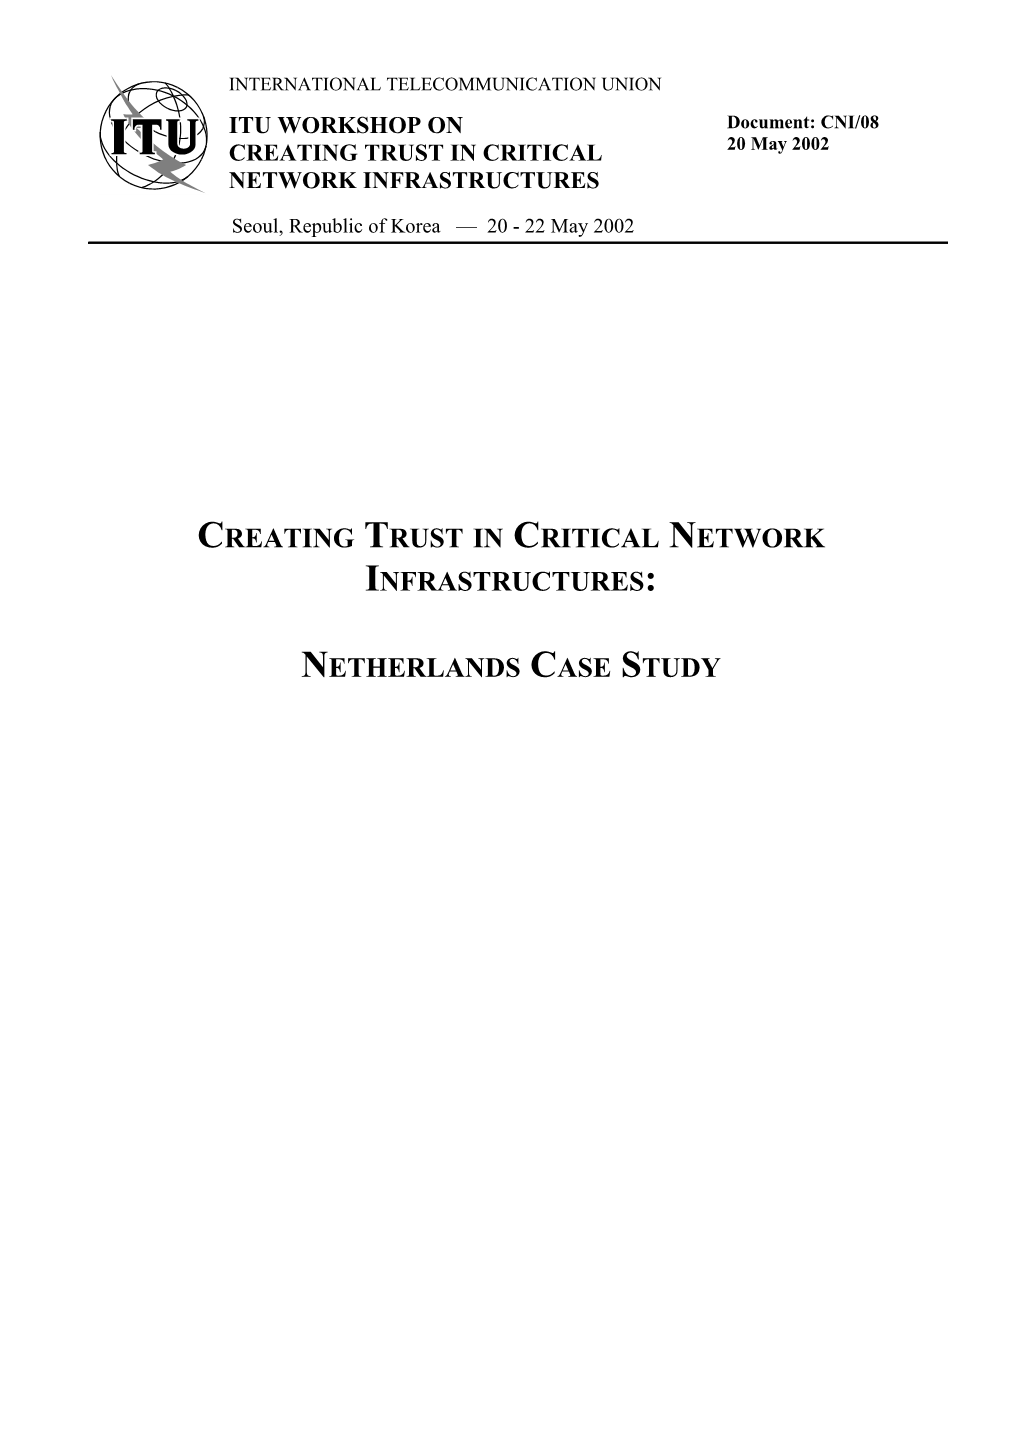 Creating Trust in Critical Network Infrastructures